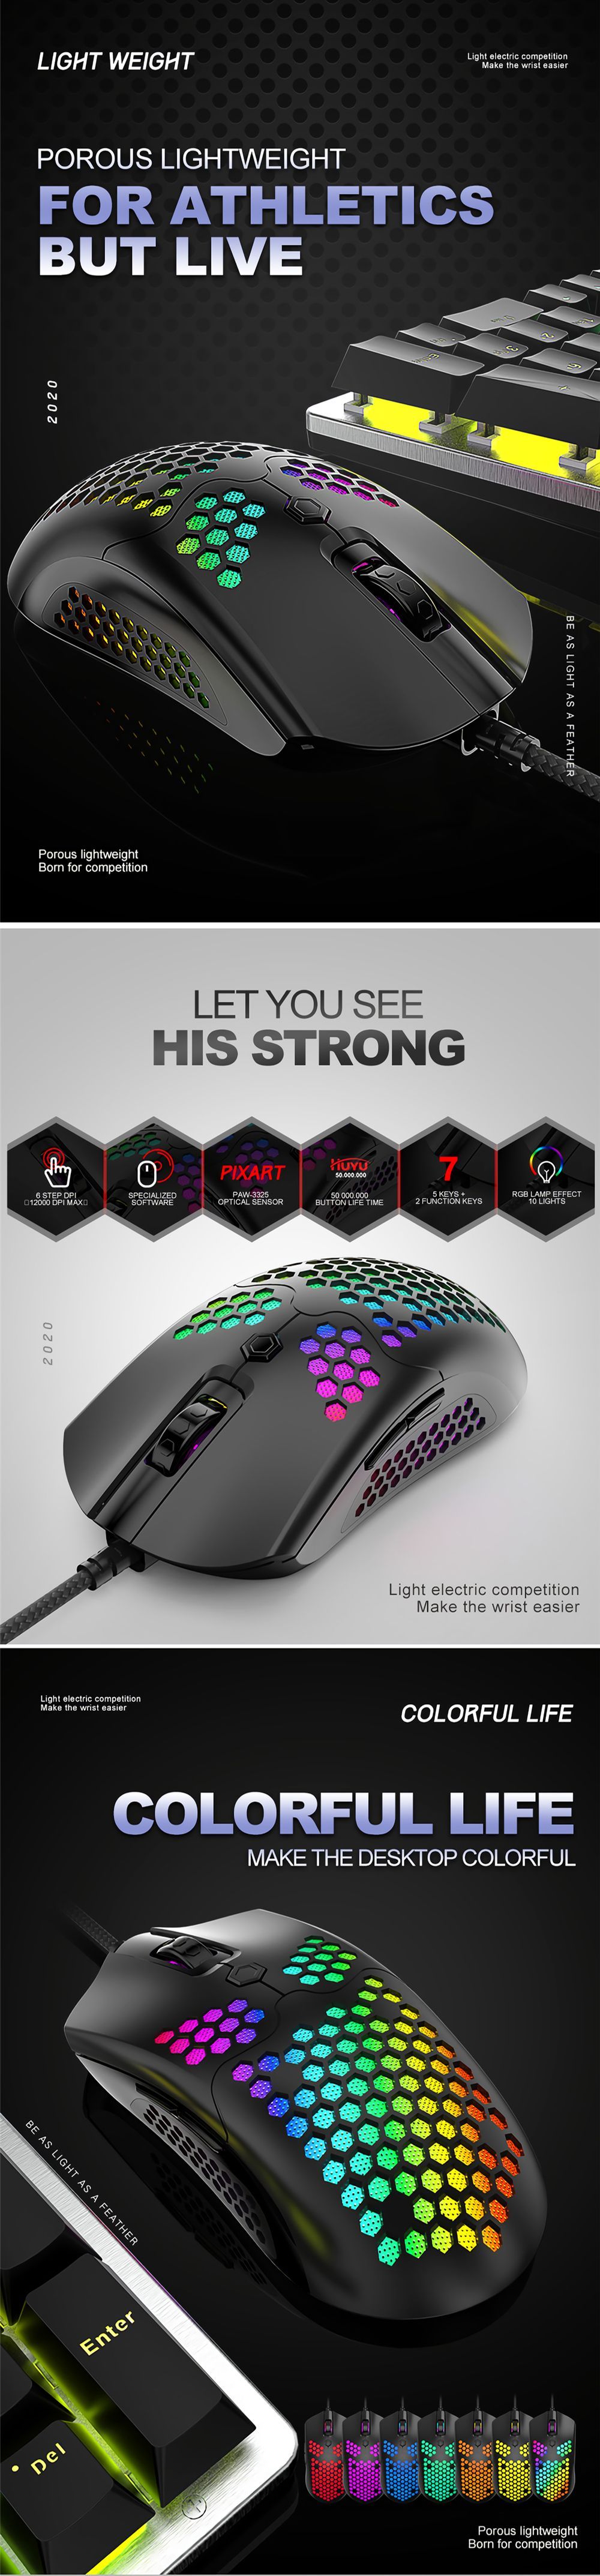 Free-wolf-M5-Wired-Game-Mouse-Breathing-RGB-Colorful-Hollow-Honeycomb-Shape-12000DPI-Gaming-Mouse-US-1684504